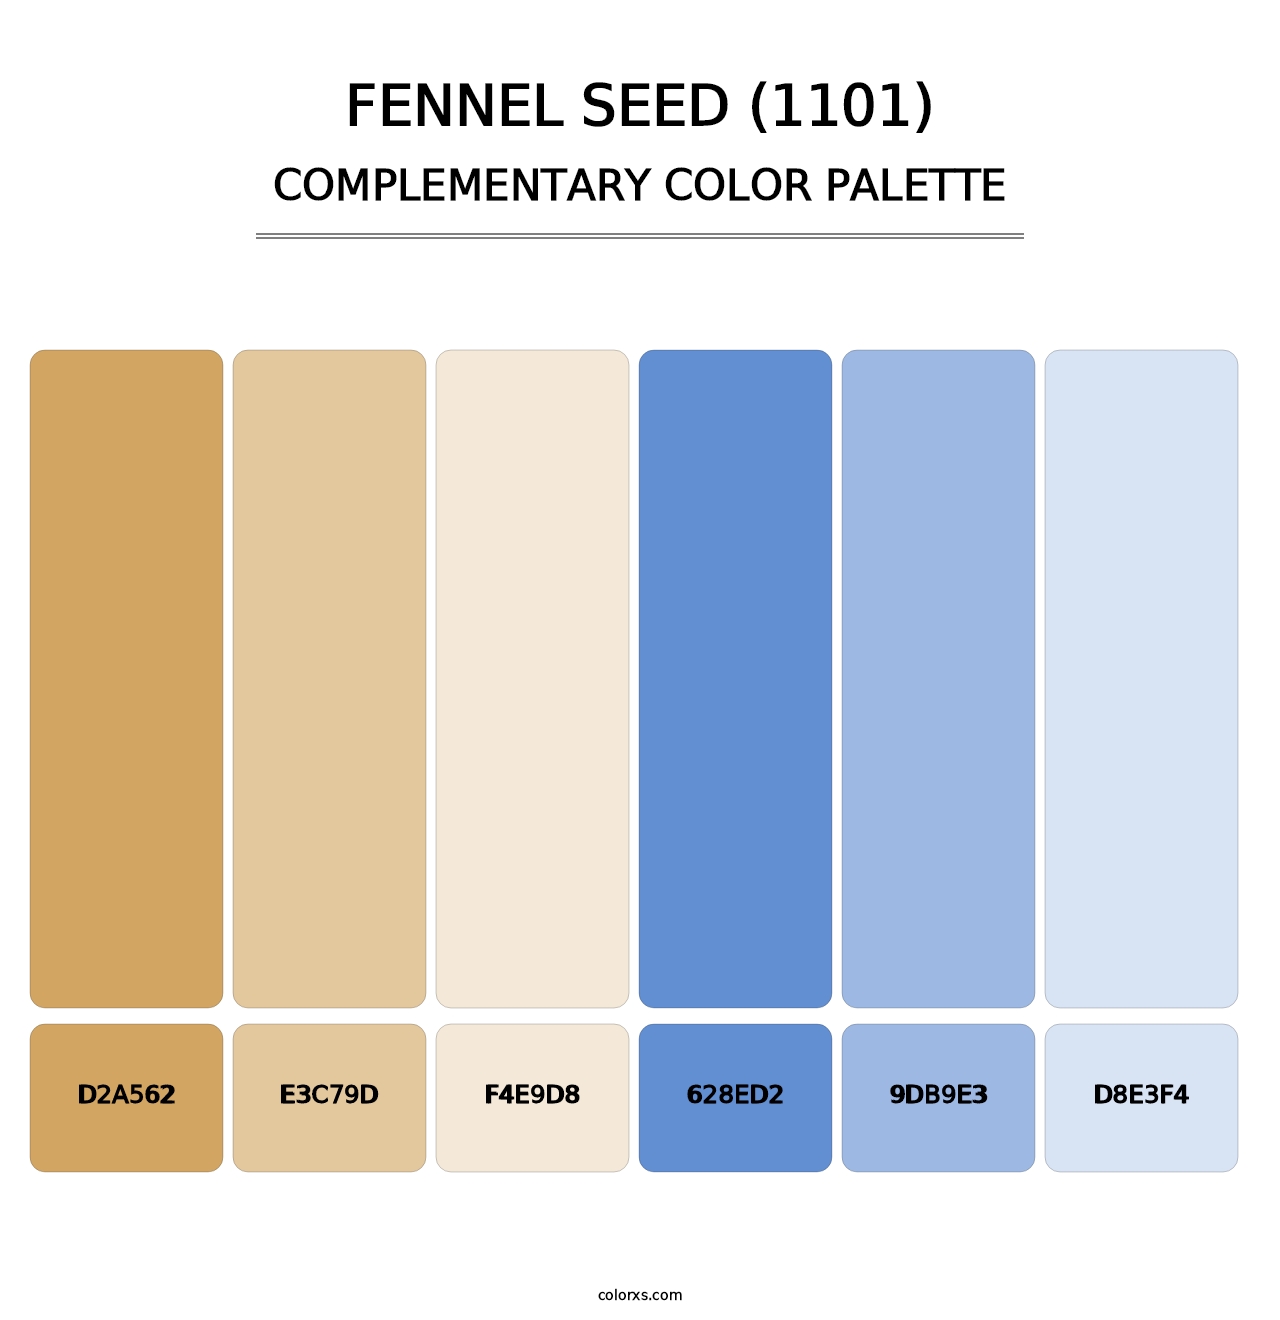 Fennel Seed (1101) - Complementary Color Palette